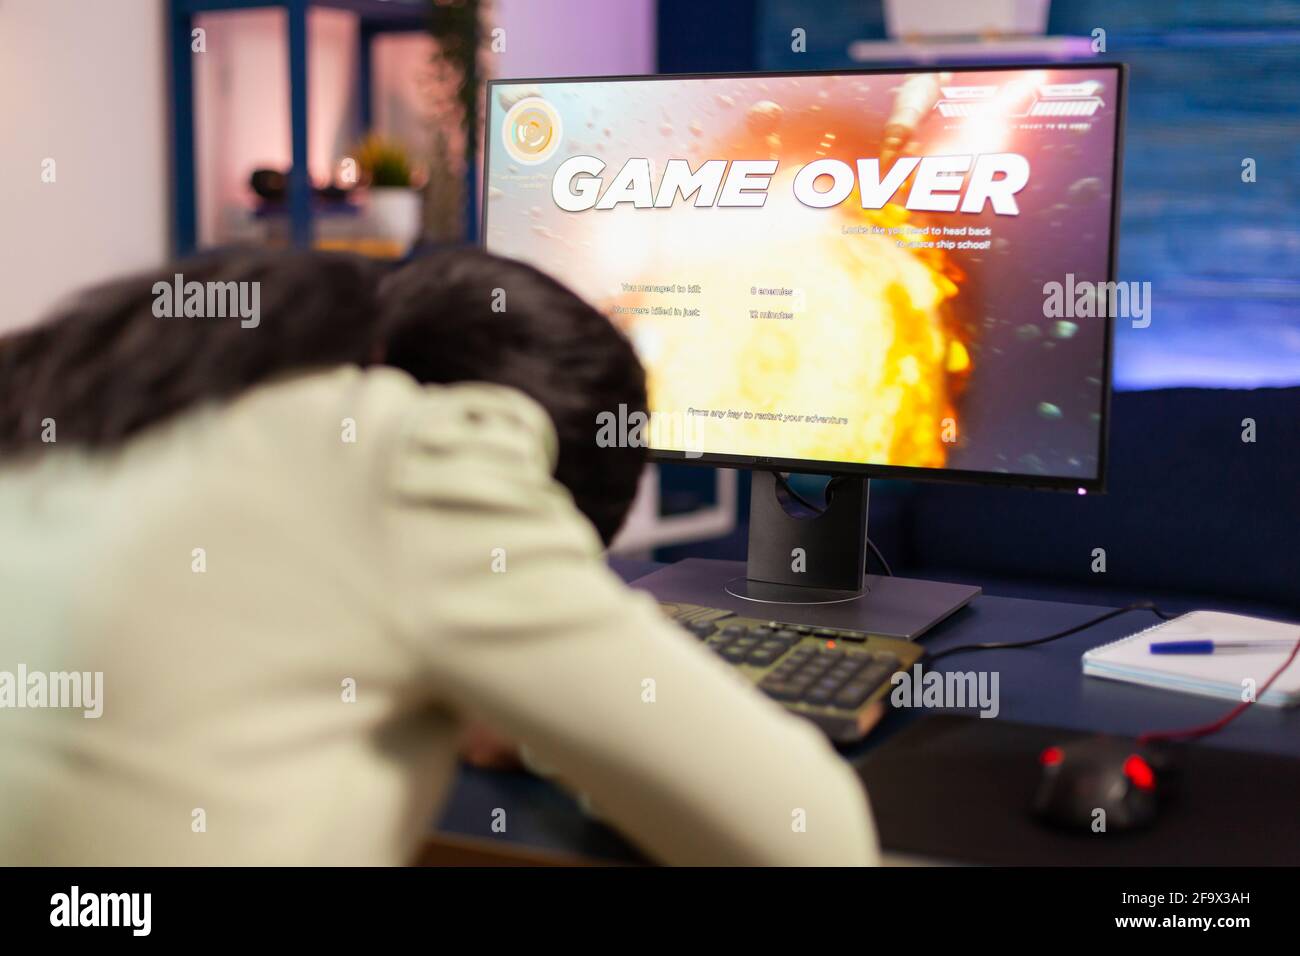 Gamer over for sad african gamer after losing championship sitting with head on the table. Angry professional gamer gaming over during an space shooter online video game. Stock Photo